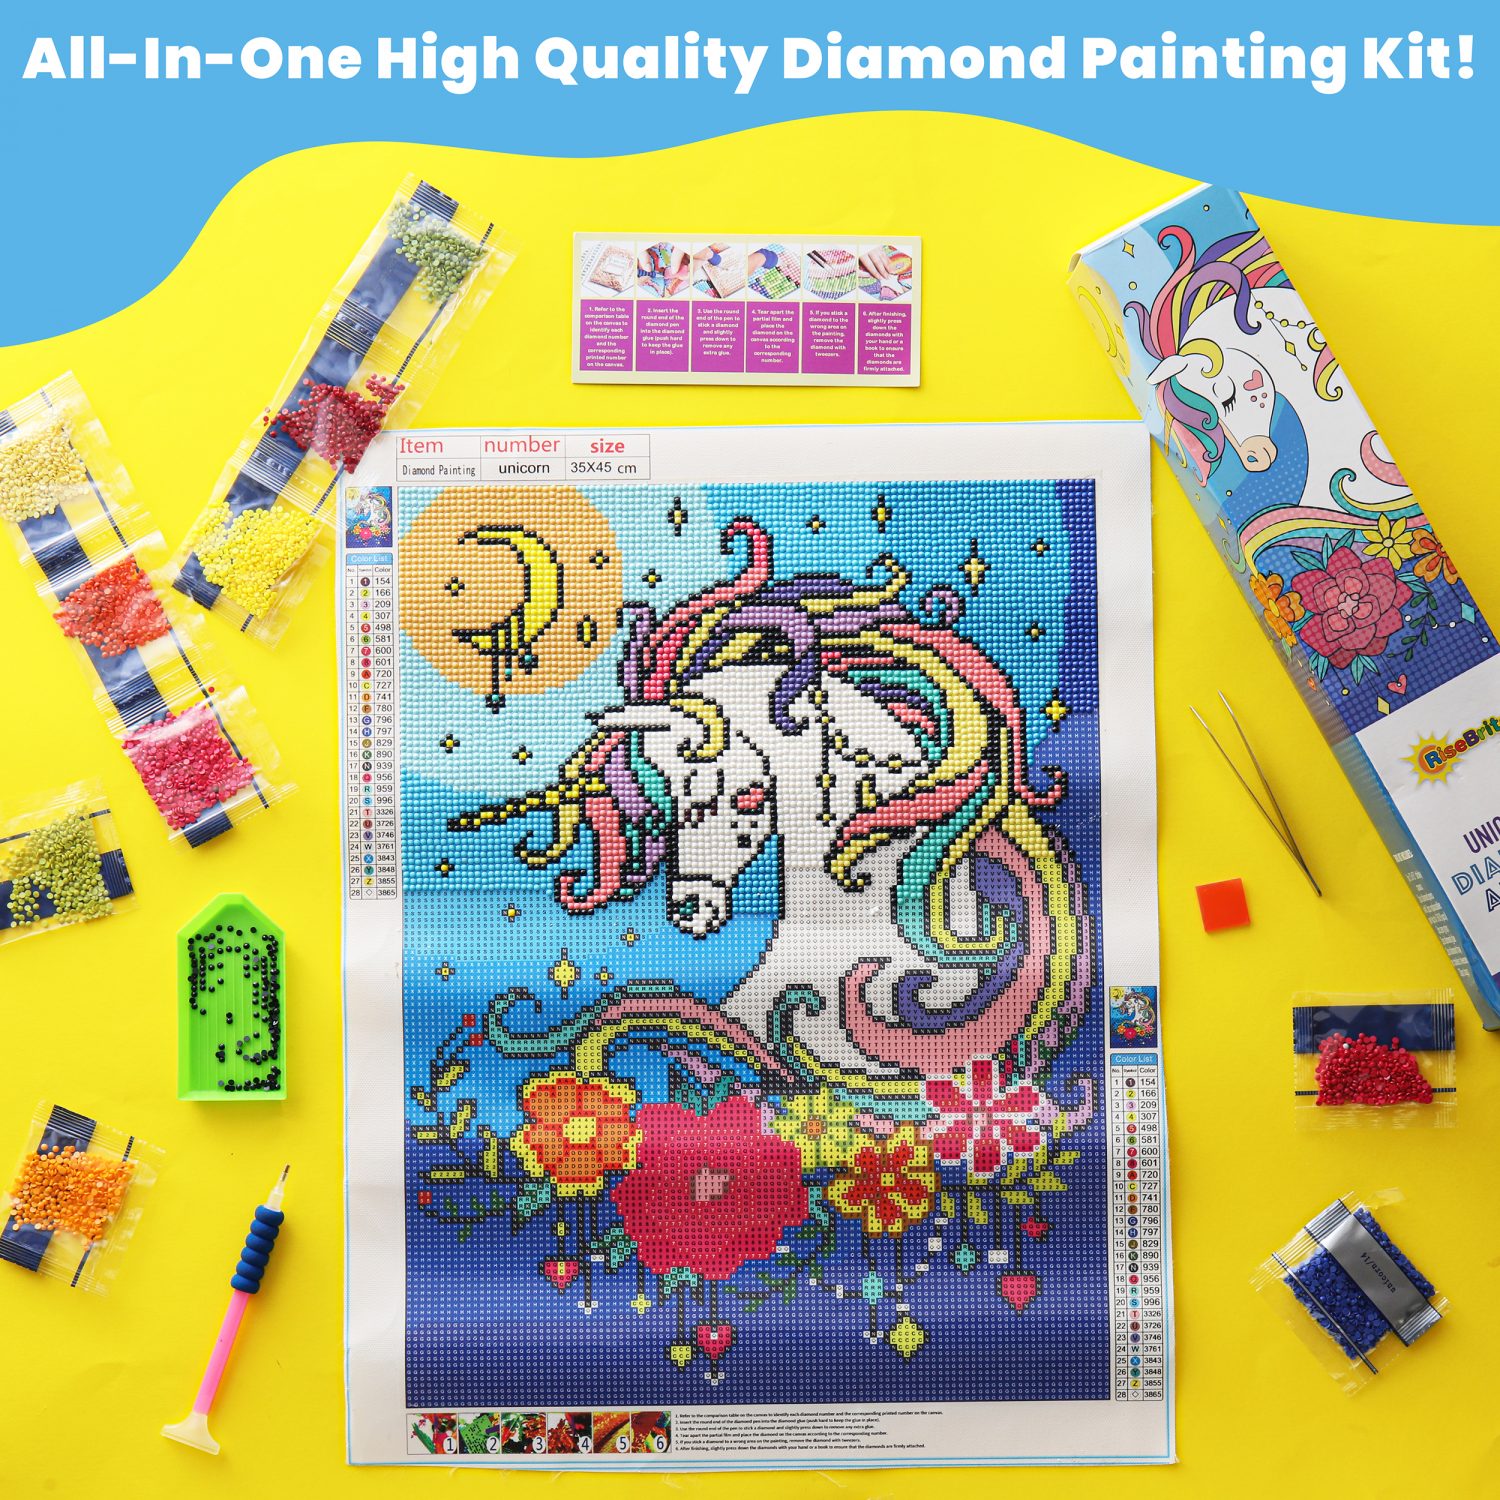 RiseBrite Diamond Painting Kit Unicorn 12x15 - All In One High Quality Full Drill Kit Includes Multi-colored 5D Diamond Drills, Drill Pen, Drill Glue, Gem Holder and Tweasers